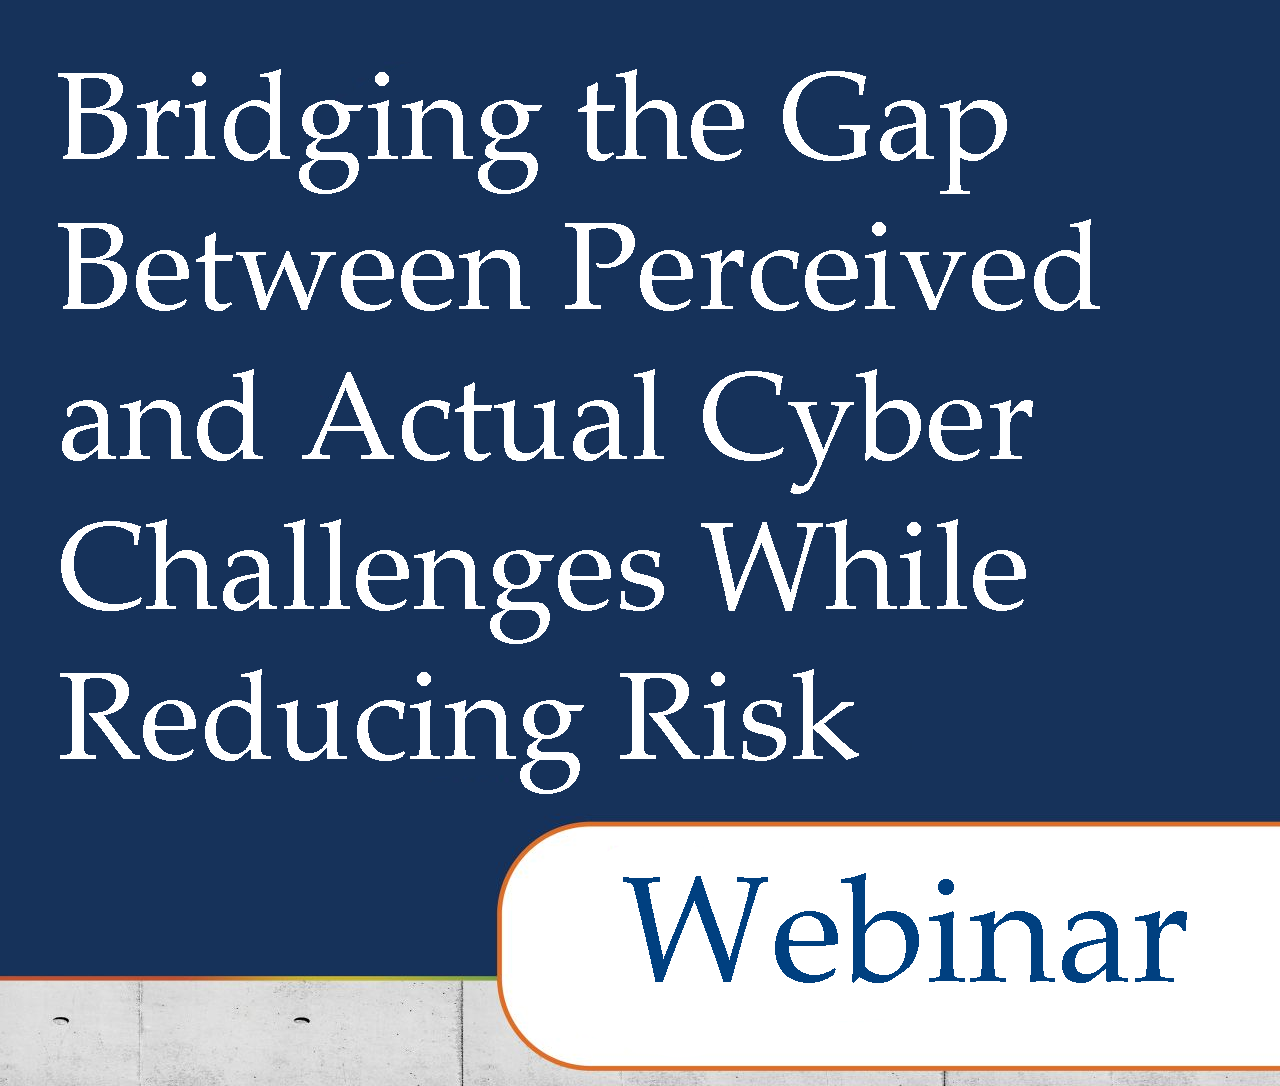 Bridging the Gap Between Perceived and Actual Cyber Challenges While Reducing Risk